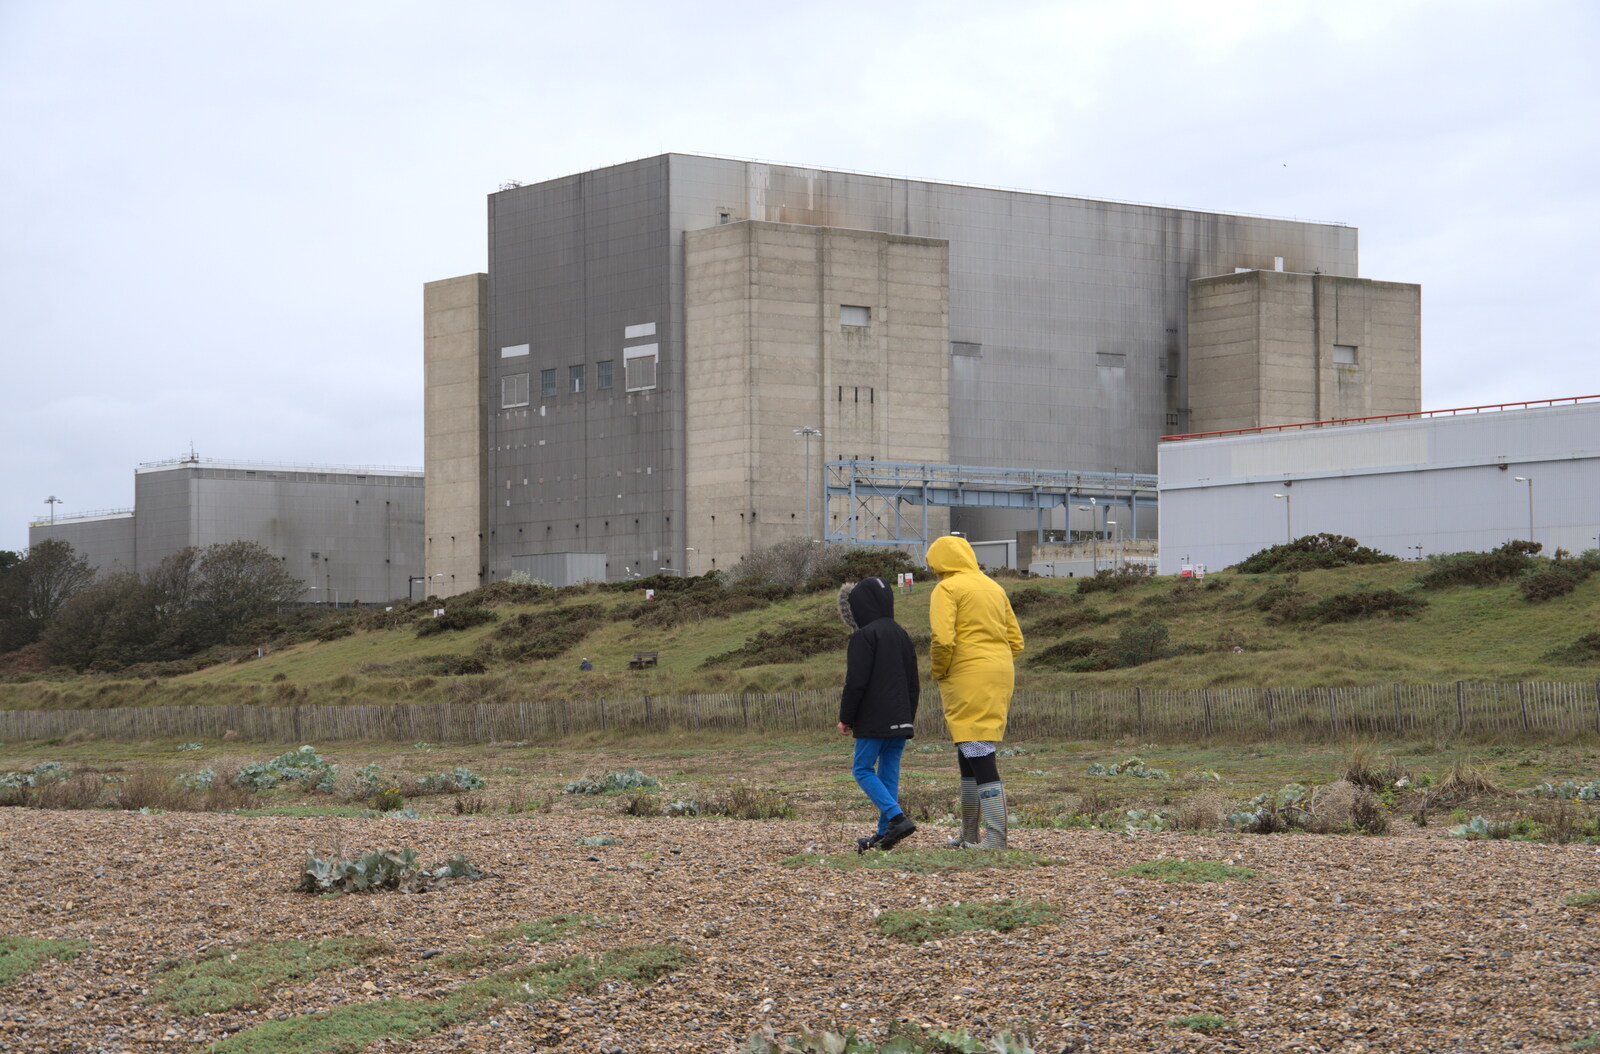 The Magnox Sizewell A, opened in 1967 from Sizewell Beach and the Lion Pub, Sizewell and Theberton, Suffolk - 4th October 2020